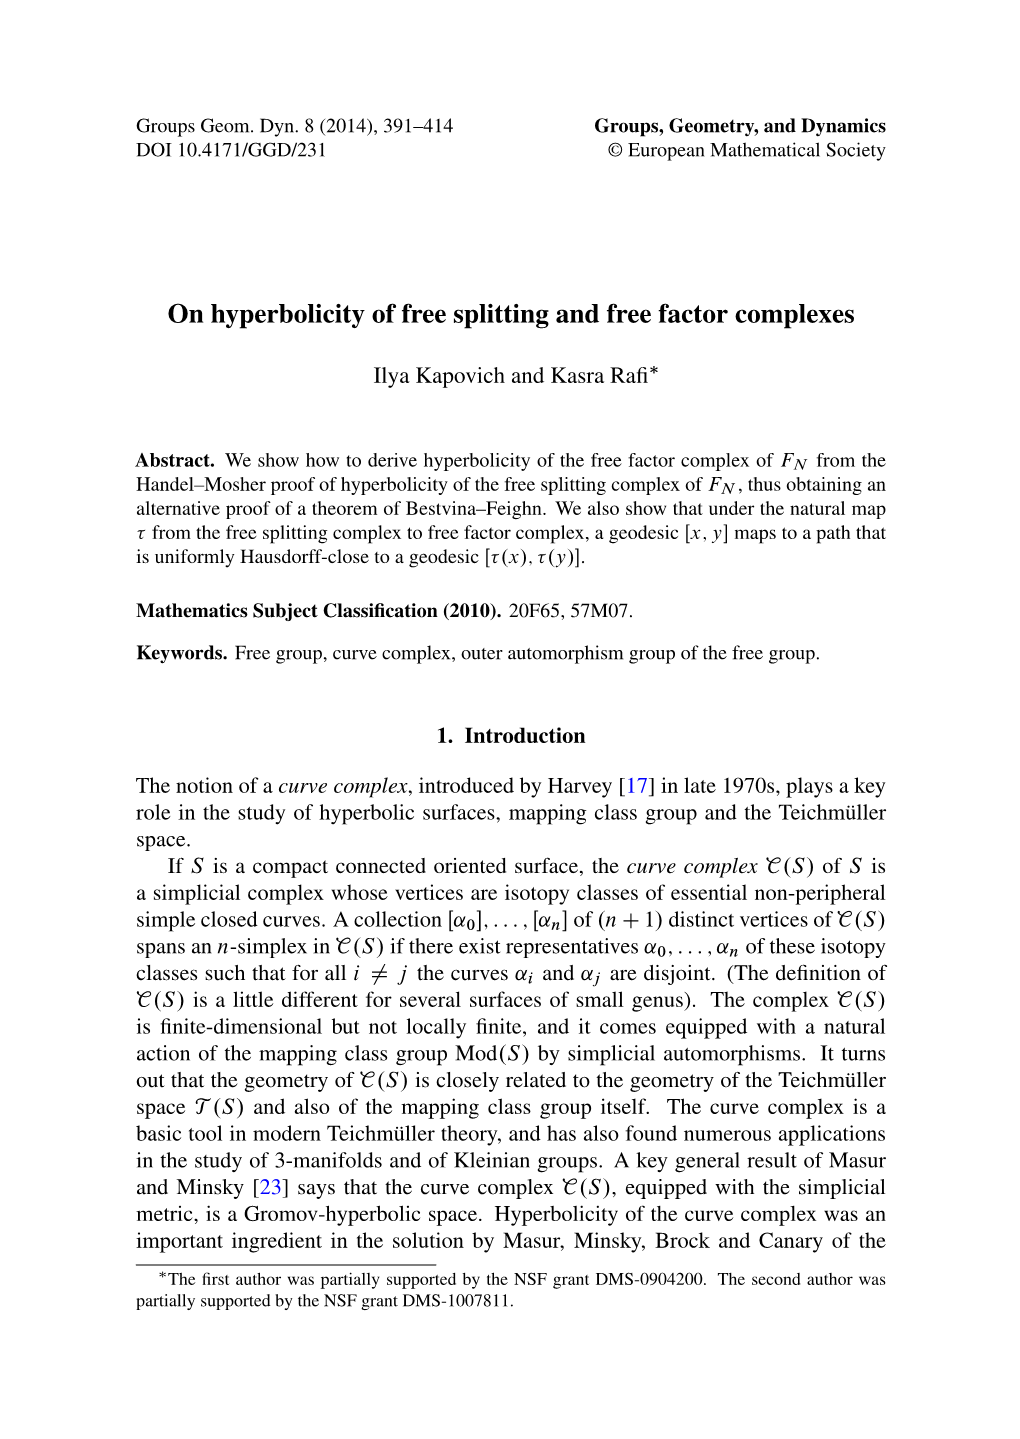 On Hyperbolicity of Free Splitting and Free Factor Complexes